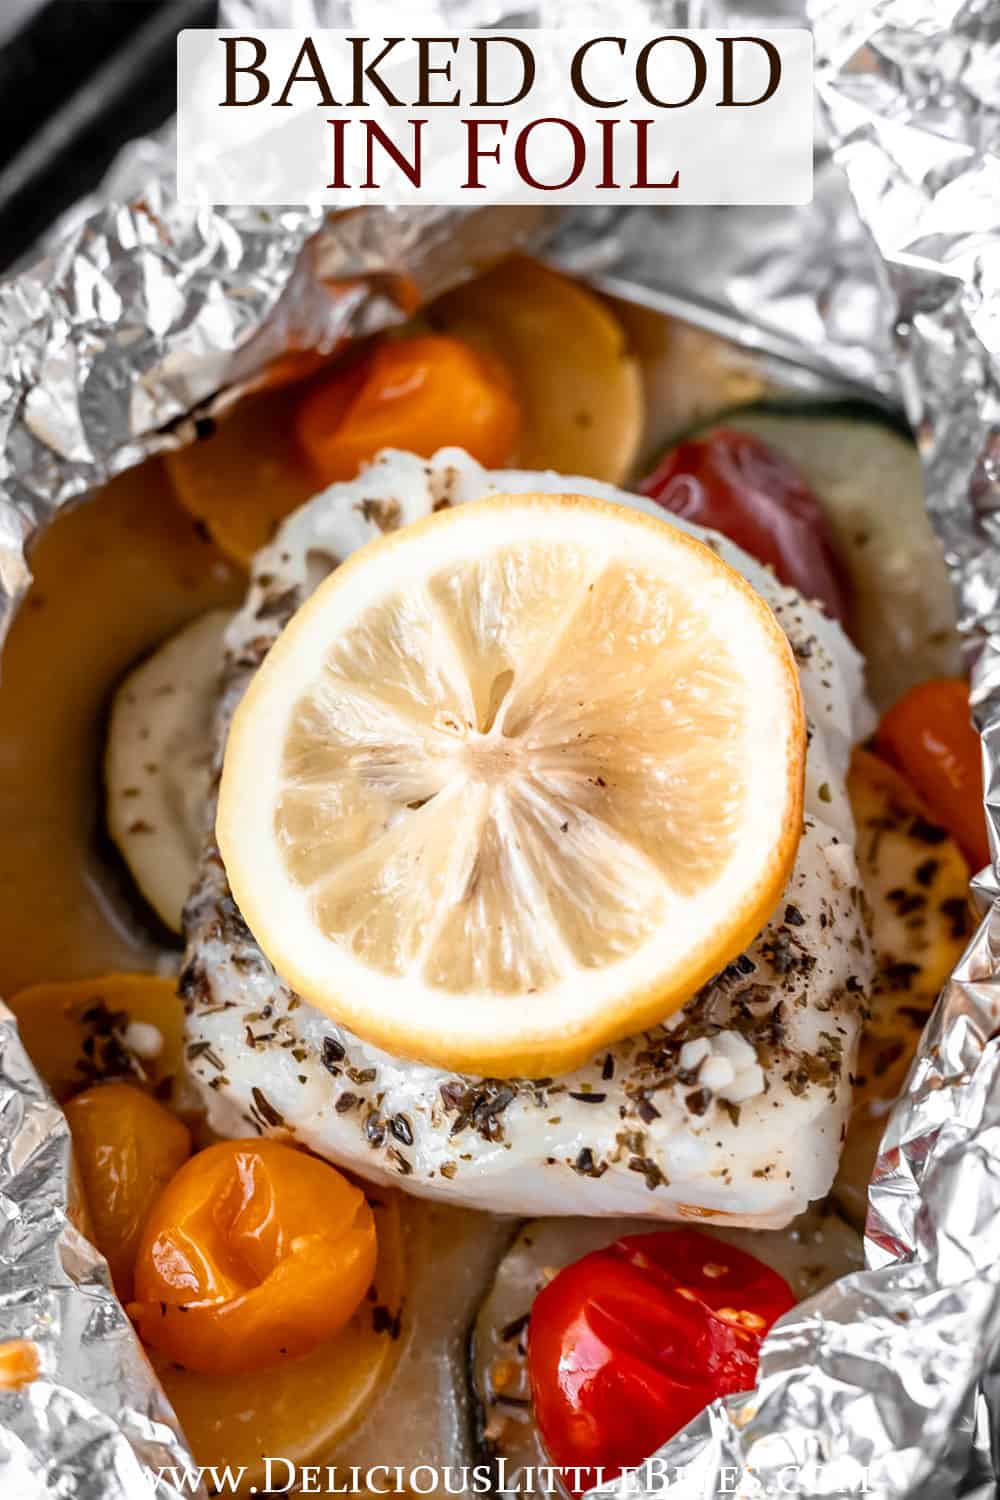 Baked cod and vegetables topped with lemon in foil with text overlay.